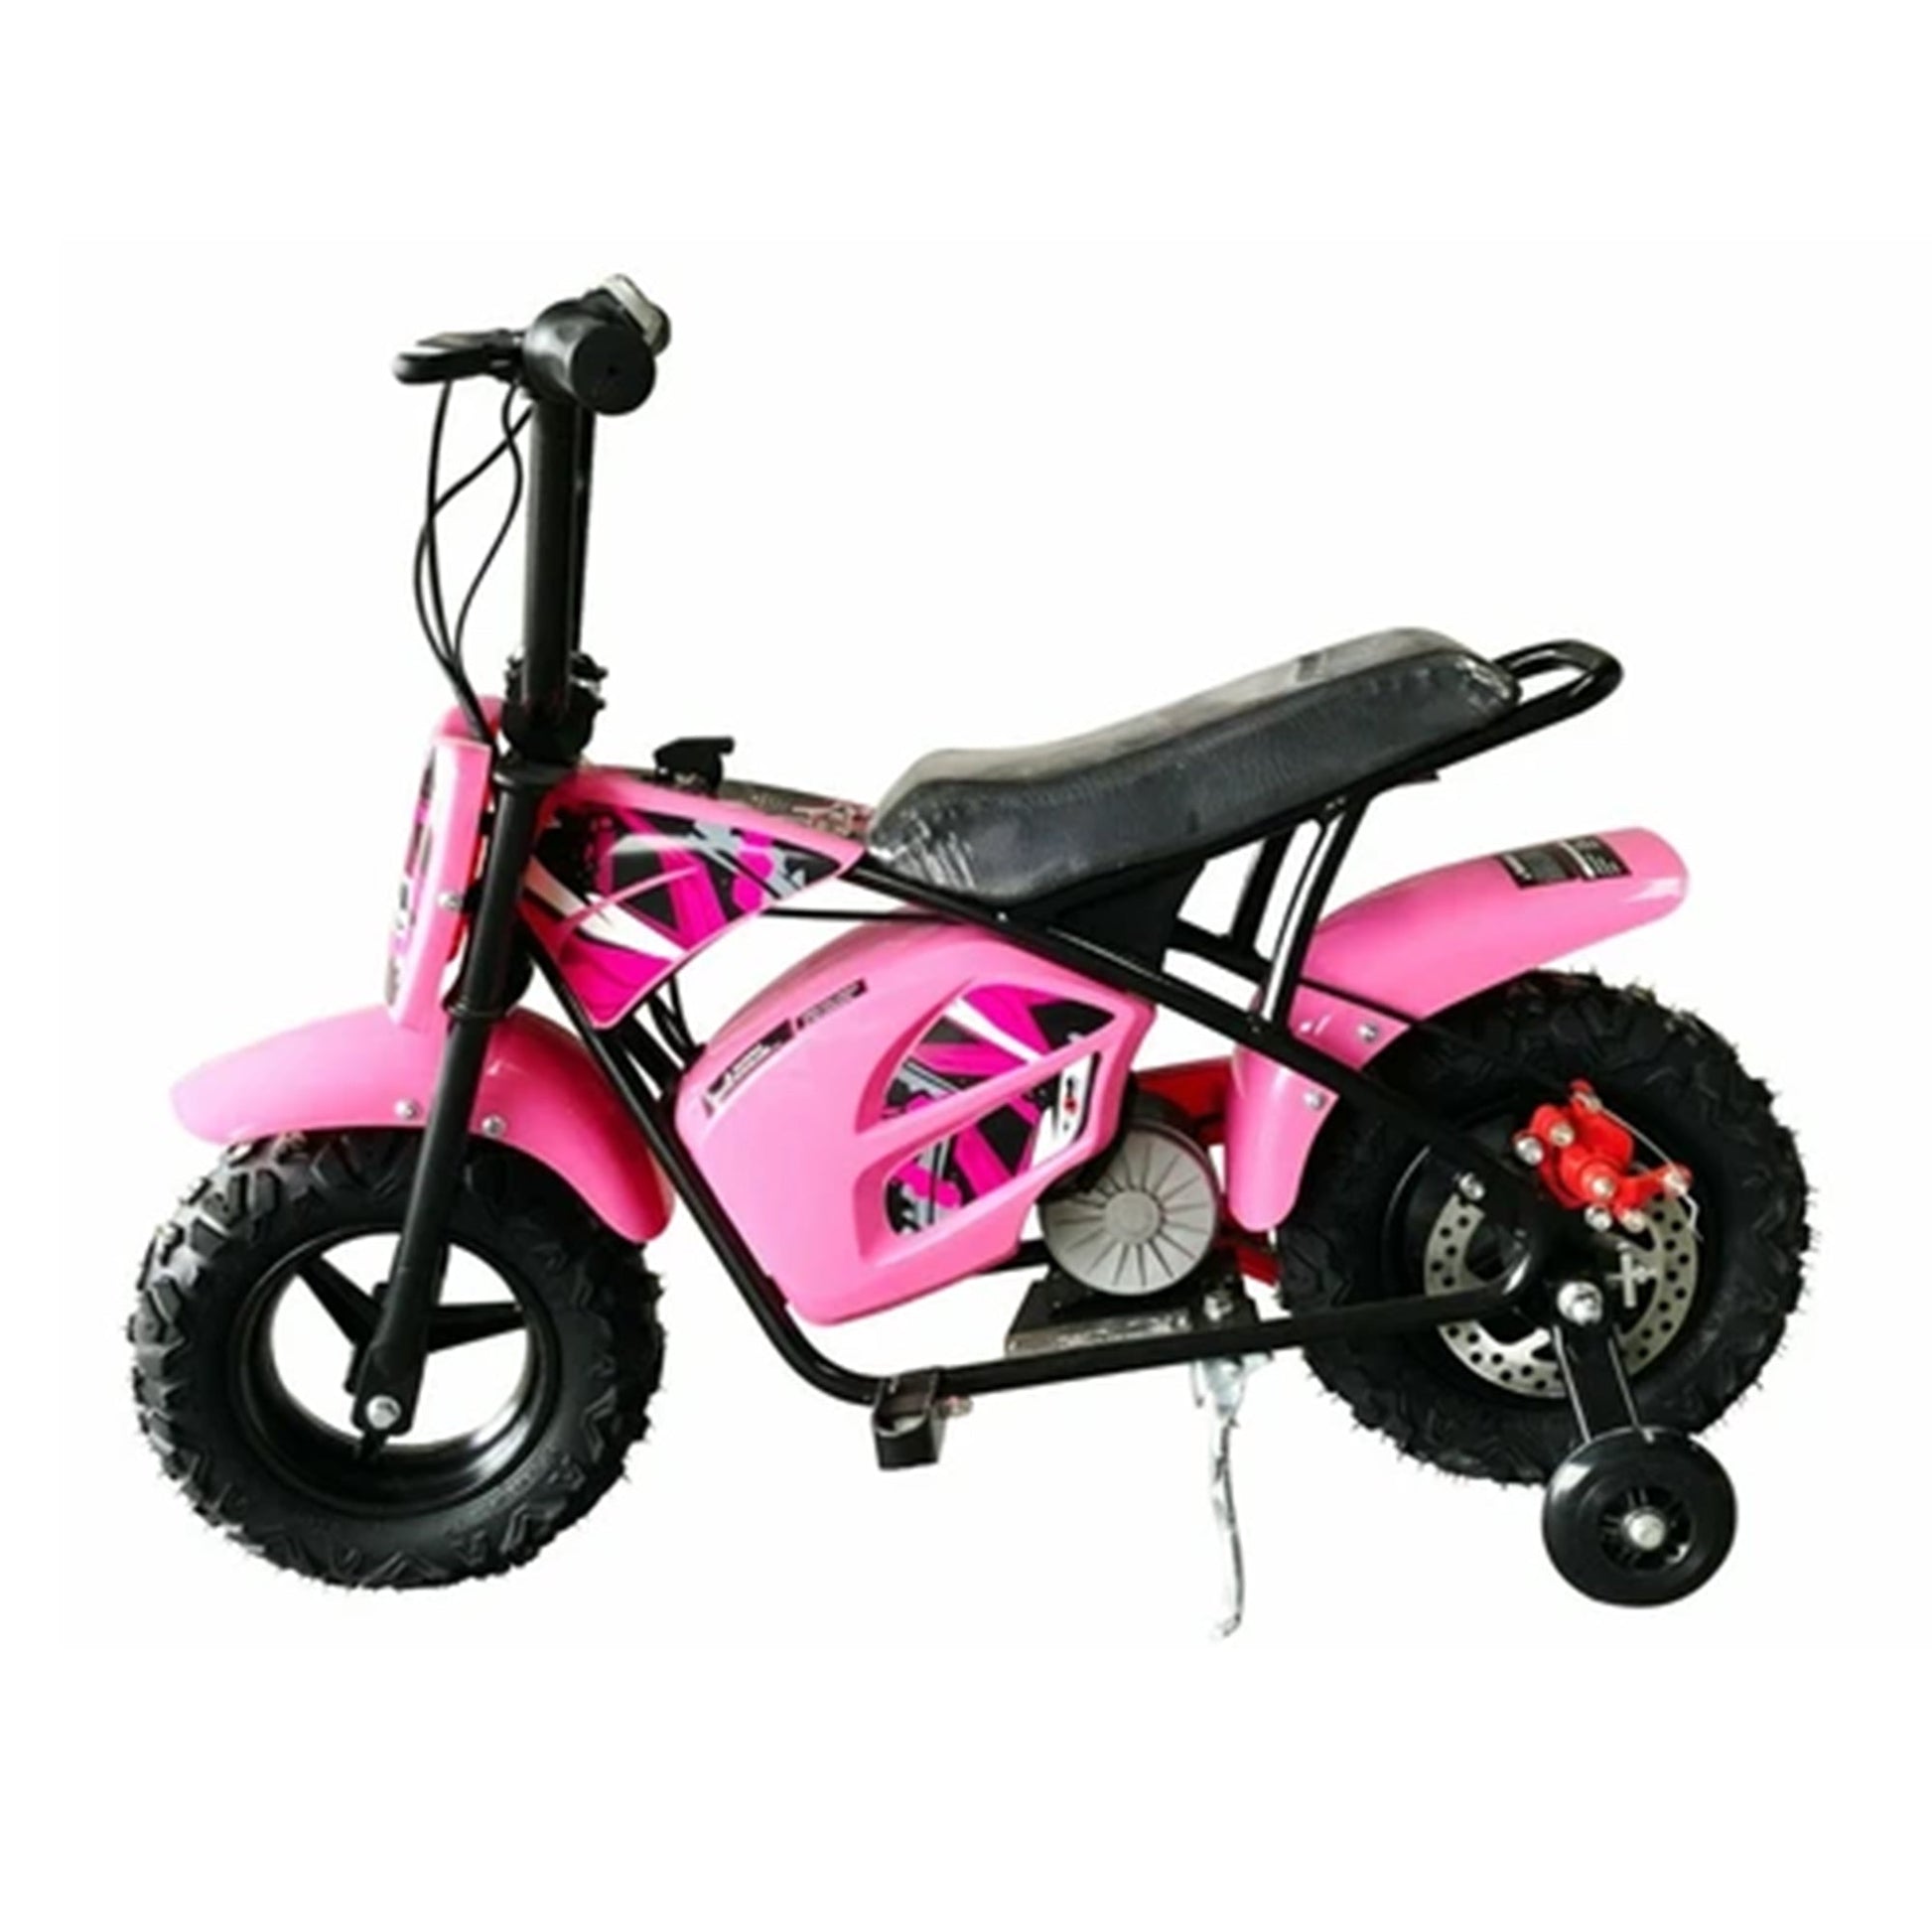 "Electric pink mini dirtbike scrambler for kids with stabilizers, 250 watt, 12 volt on white background."